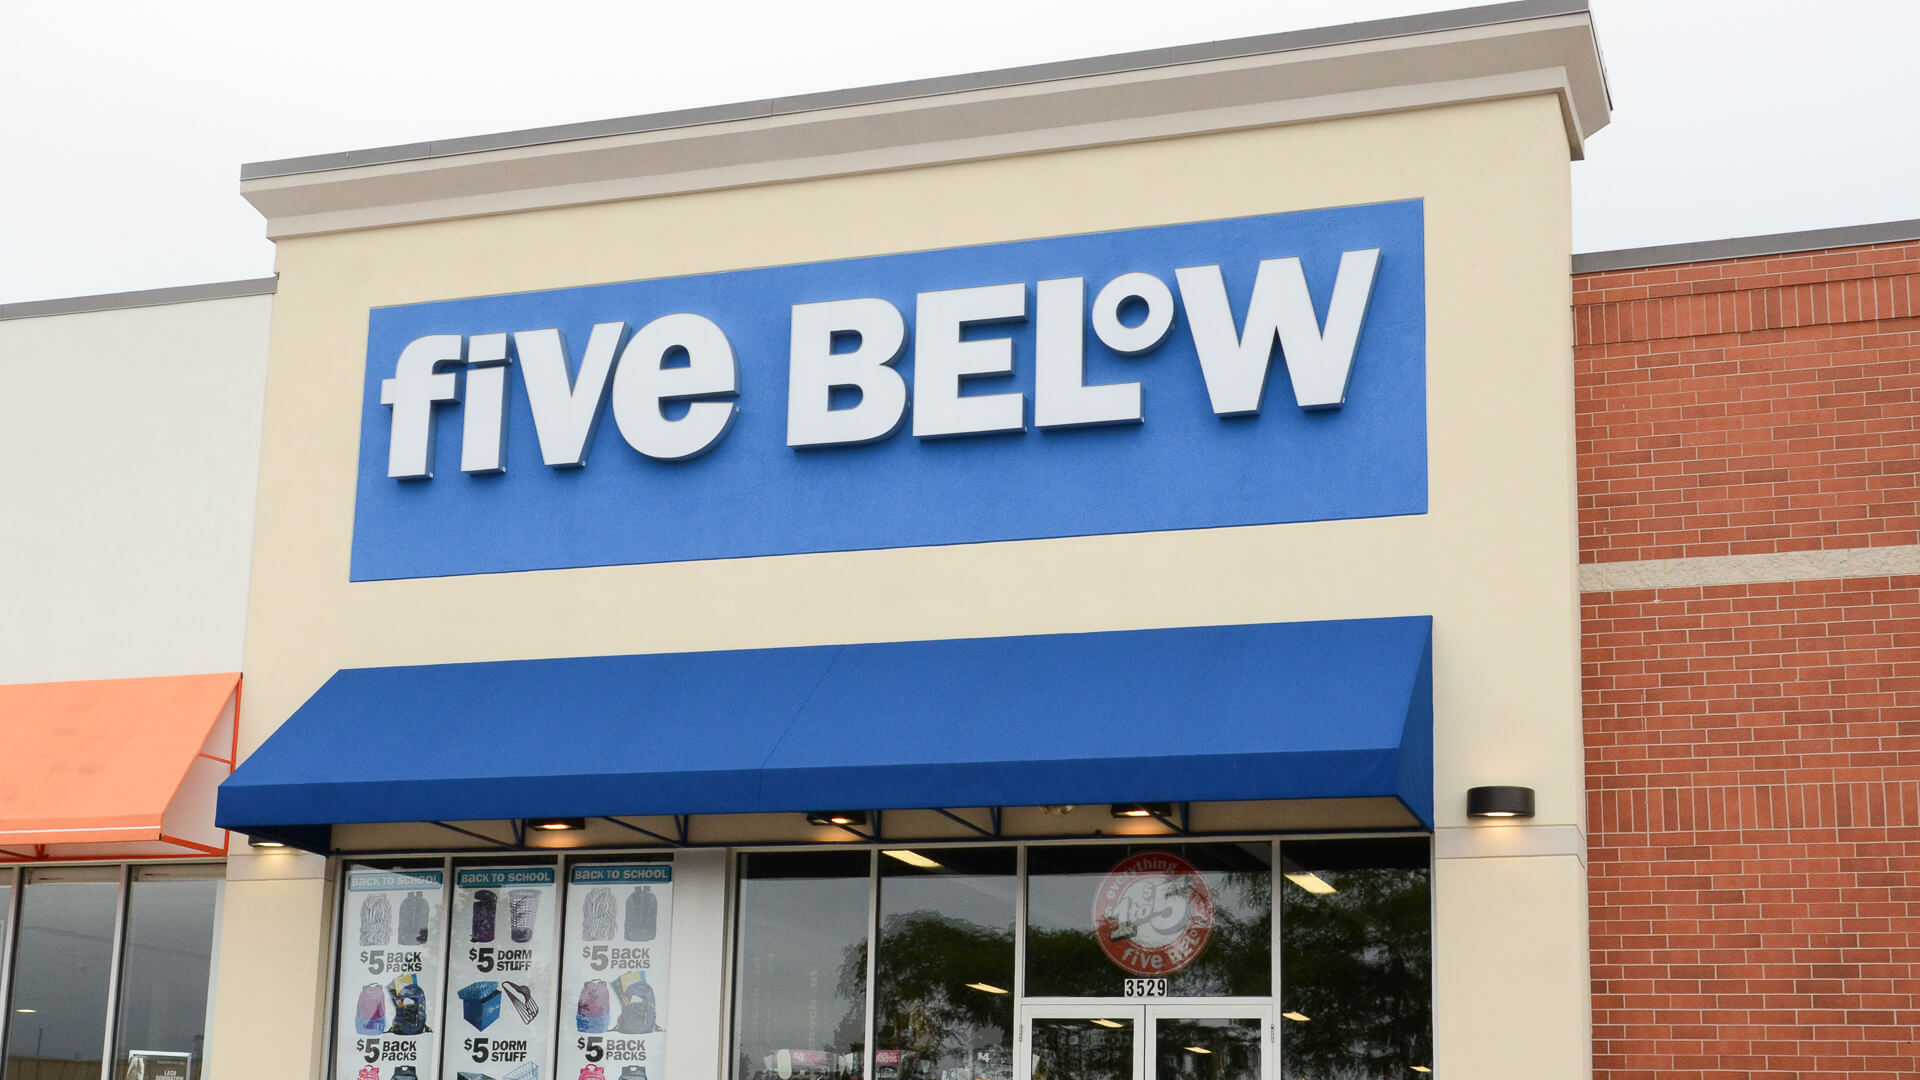 20 best finds under $10 from Five Below for holiday gifting